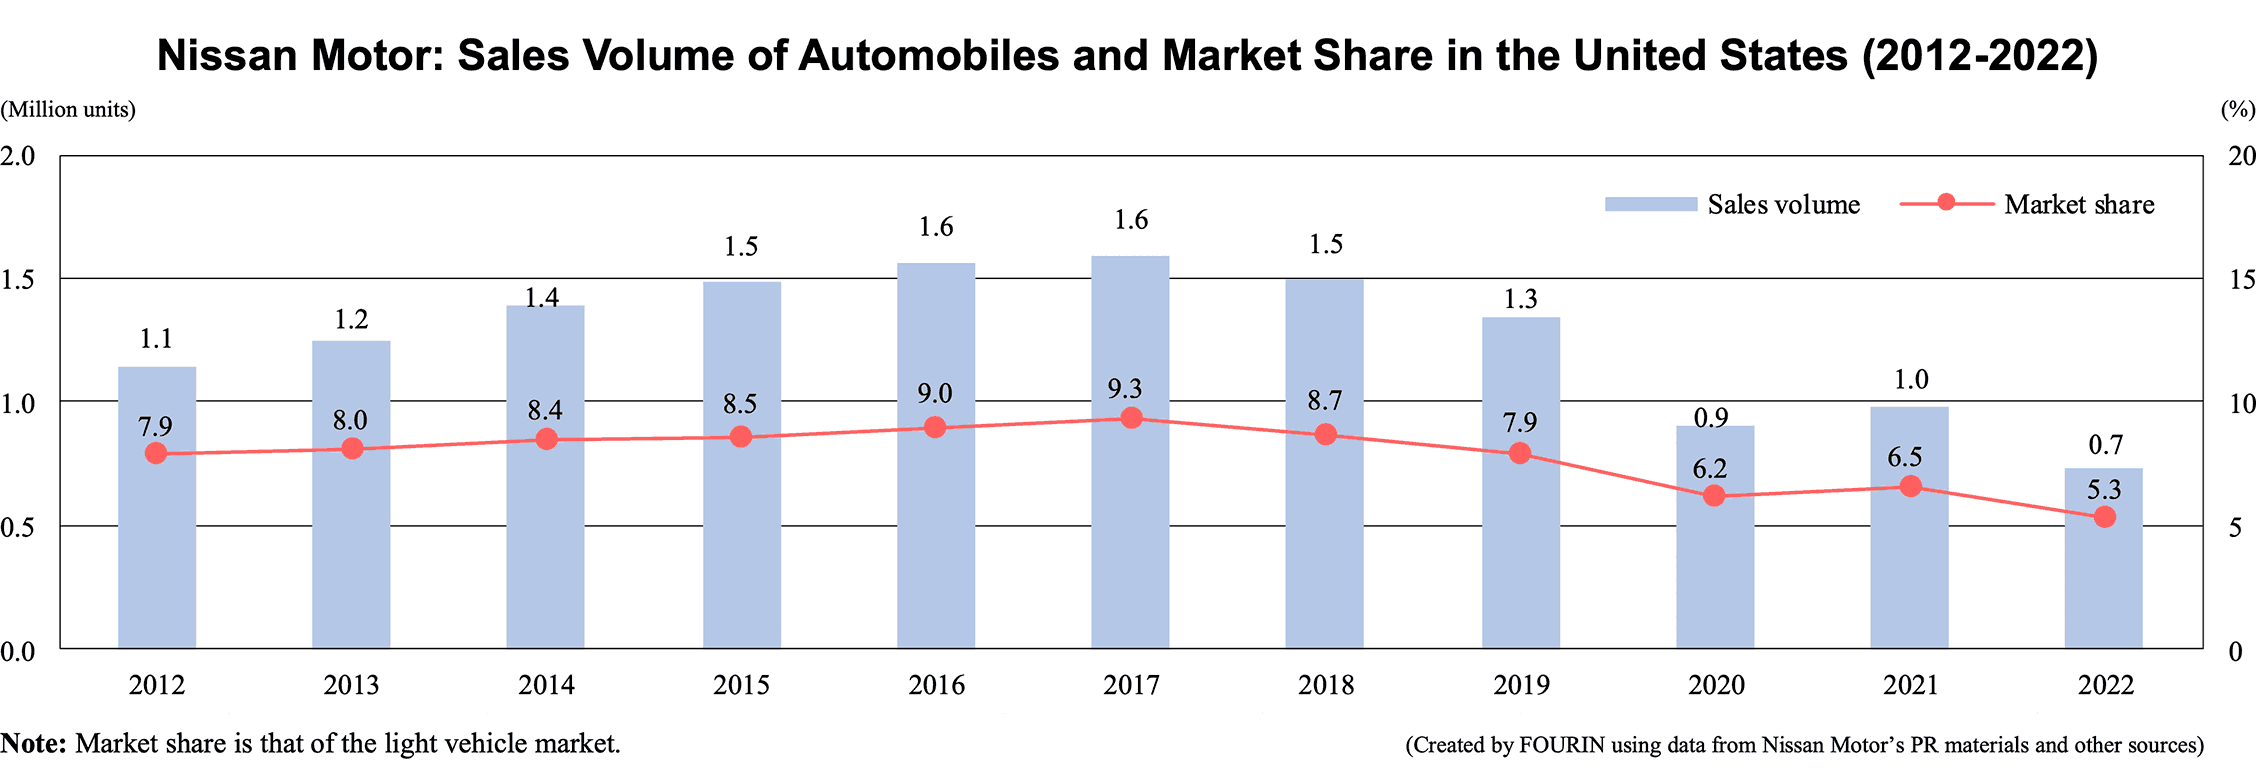 Nissan Motor: Sales Volume of Automobiles and Market Share in the United States (2012-2022)